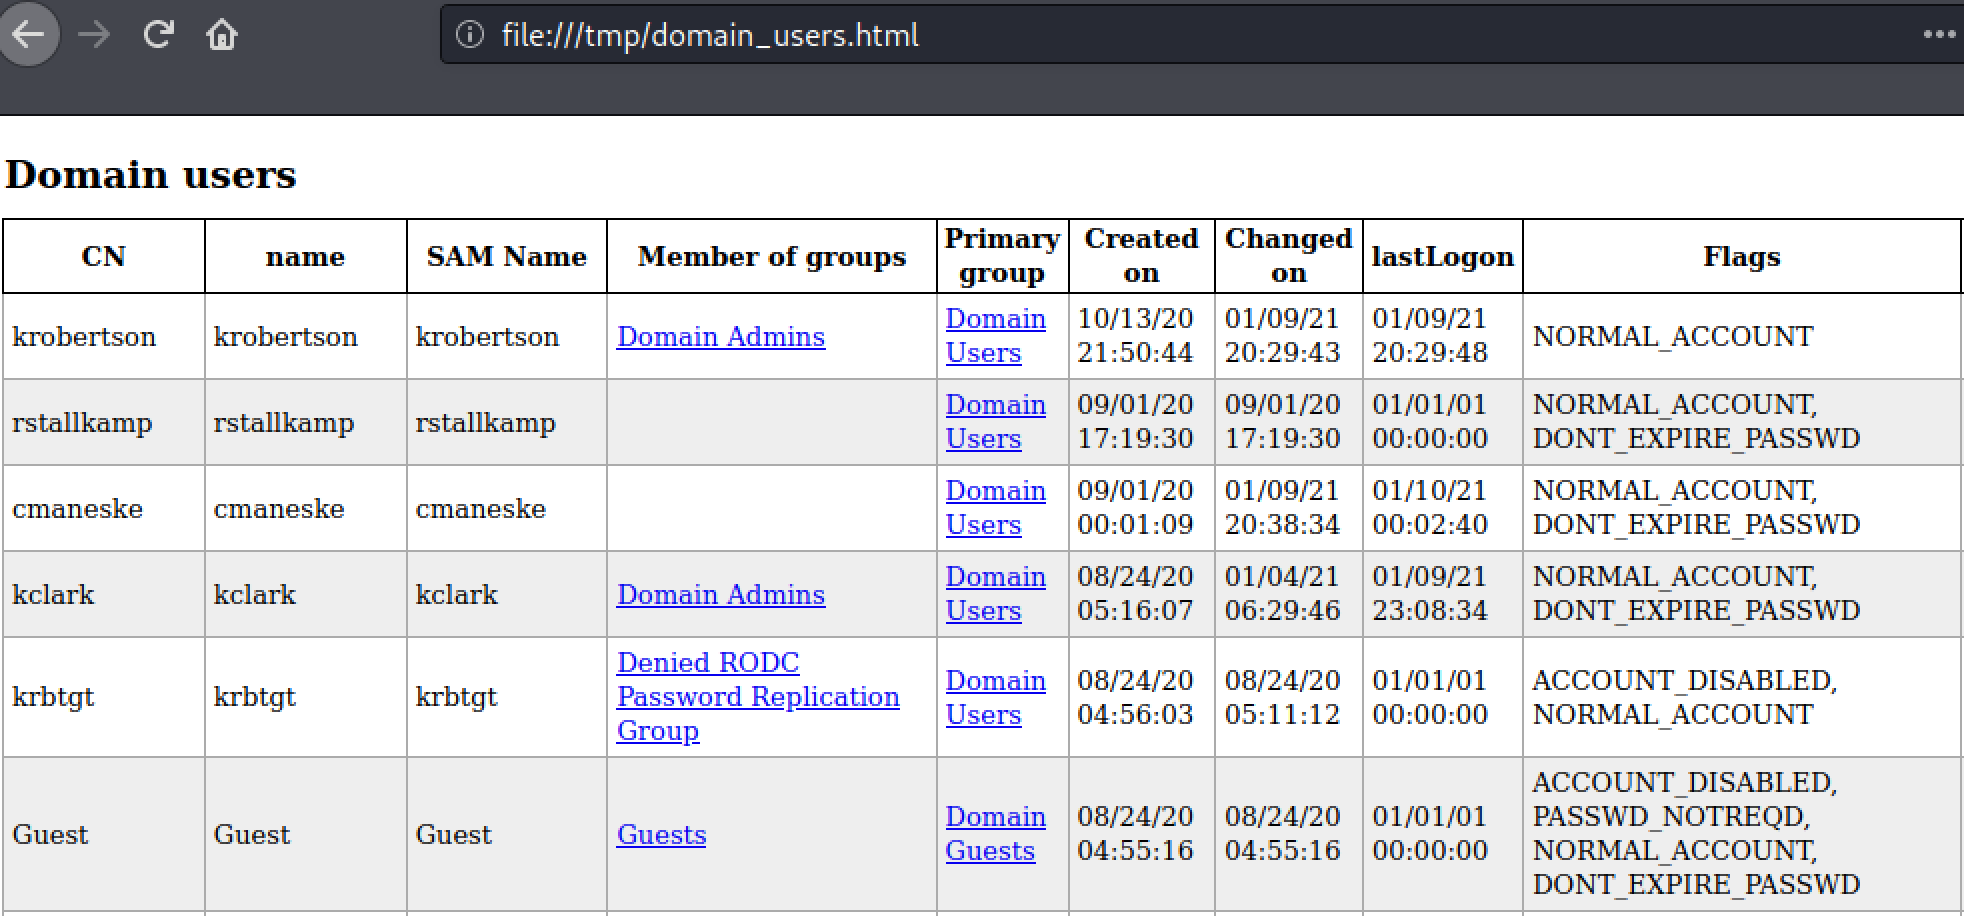 Viewing the ldapdomaindump domain users file in a web browser